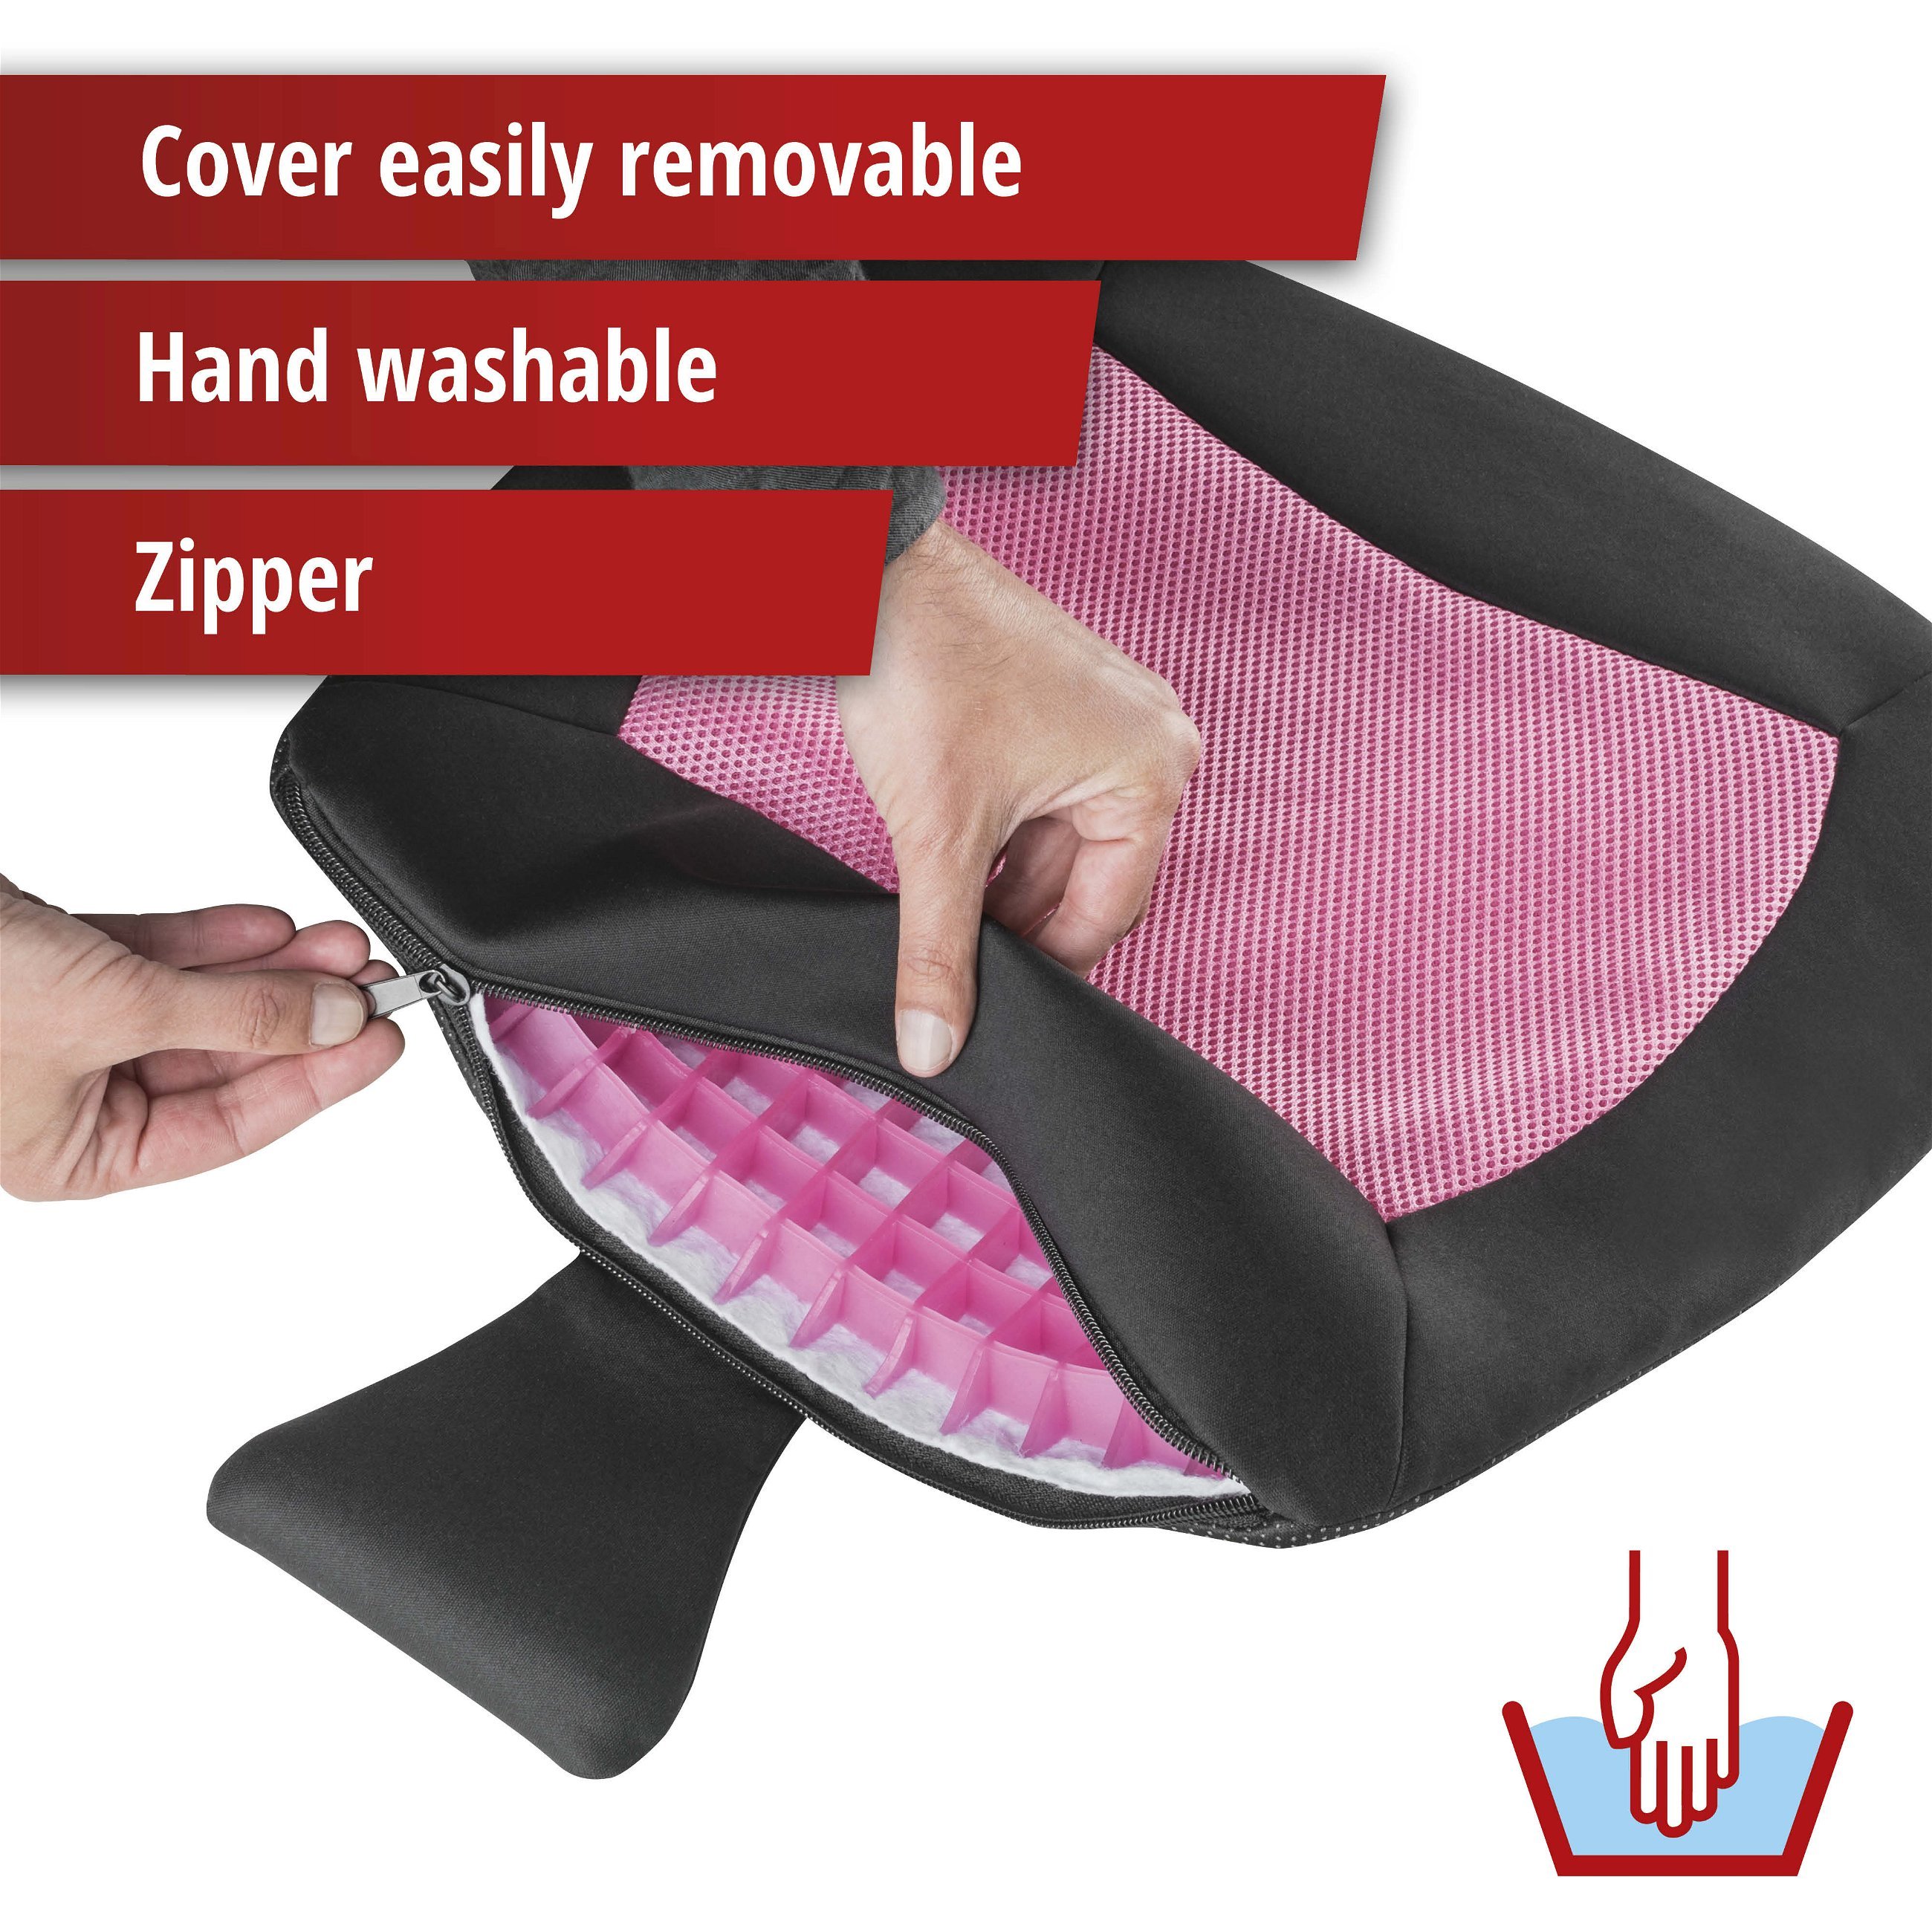 Seat cushion Cool Touch black-pink